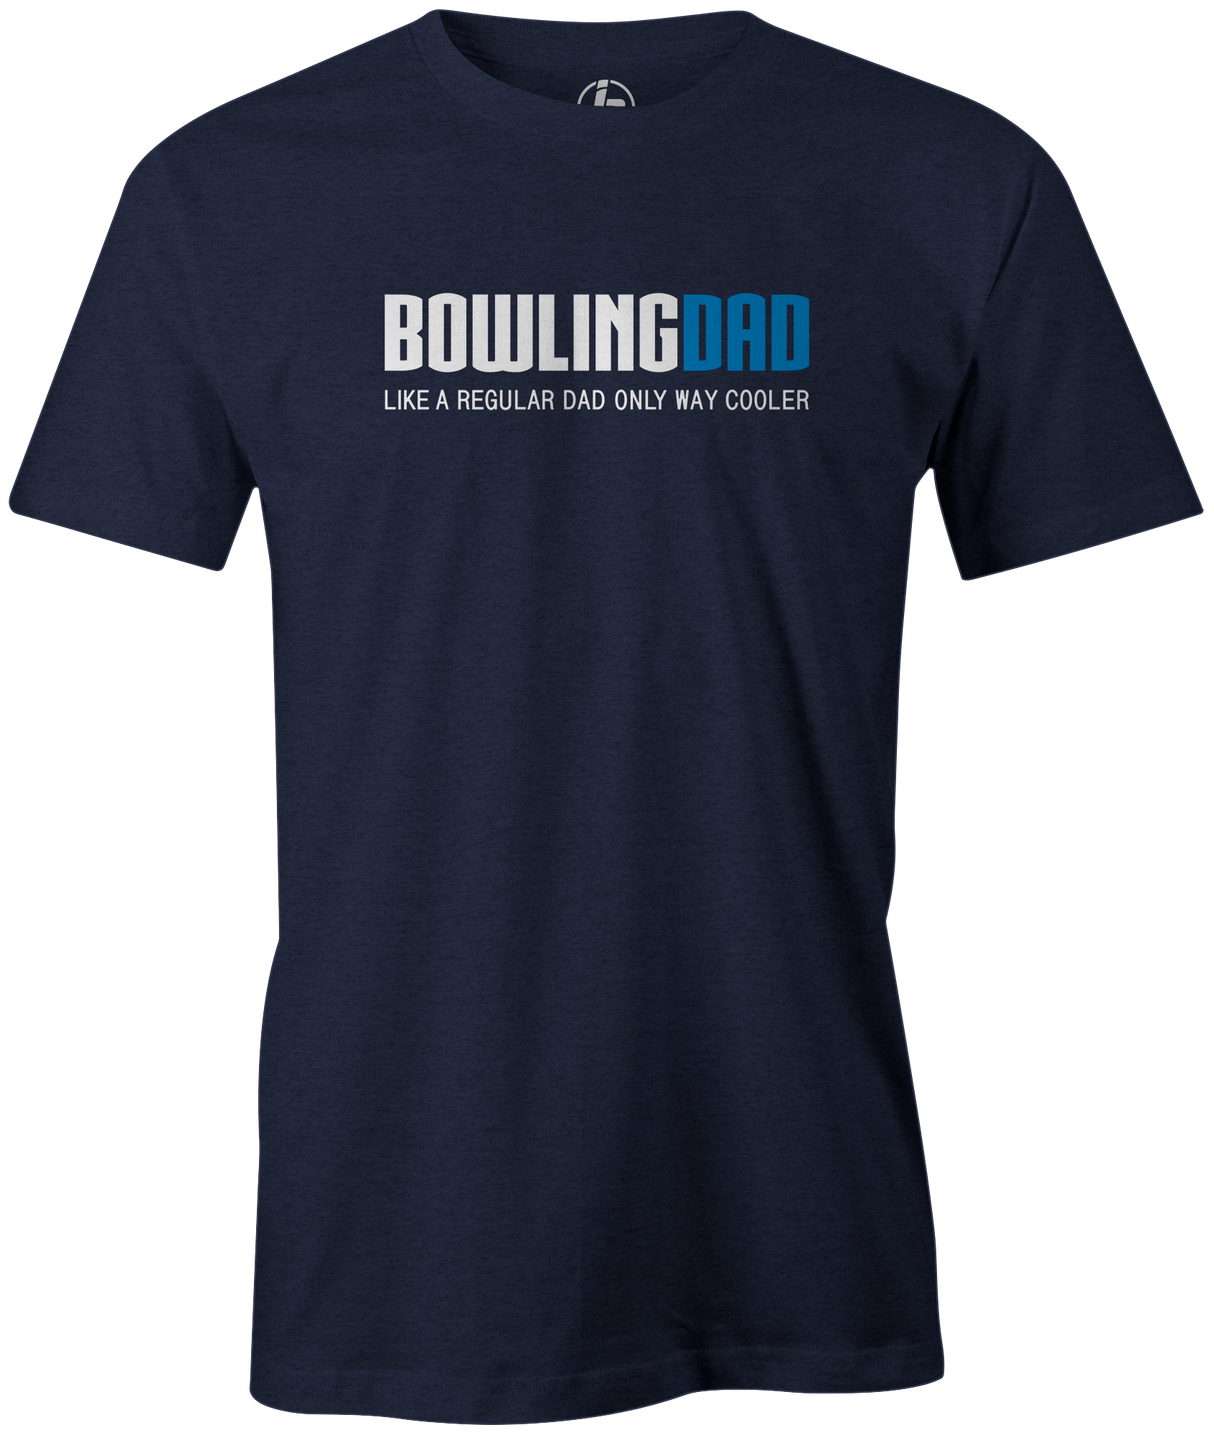 Bowling Dad Men's Bowling shirt, navy, tee, tee-shirt, tee shirt, apparel, merch, cool, funny, vintage, father's day, gift, present, cheap, discount, free shipping.